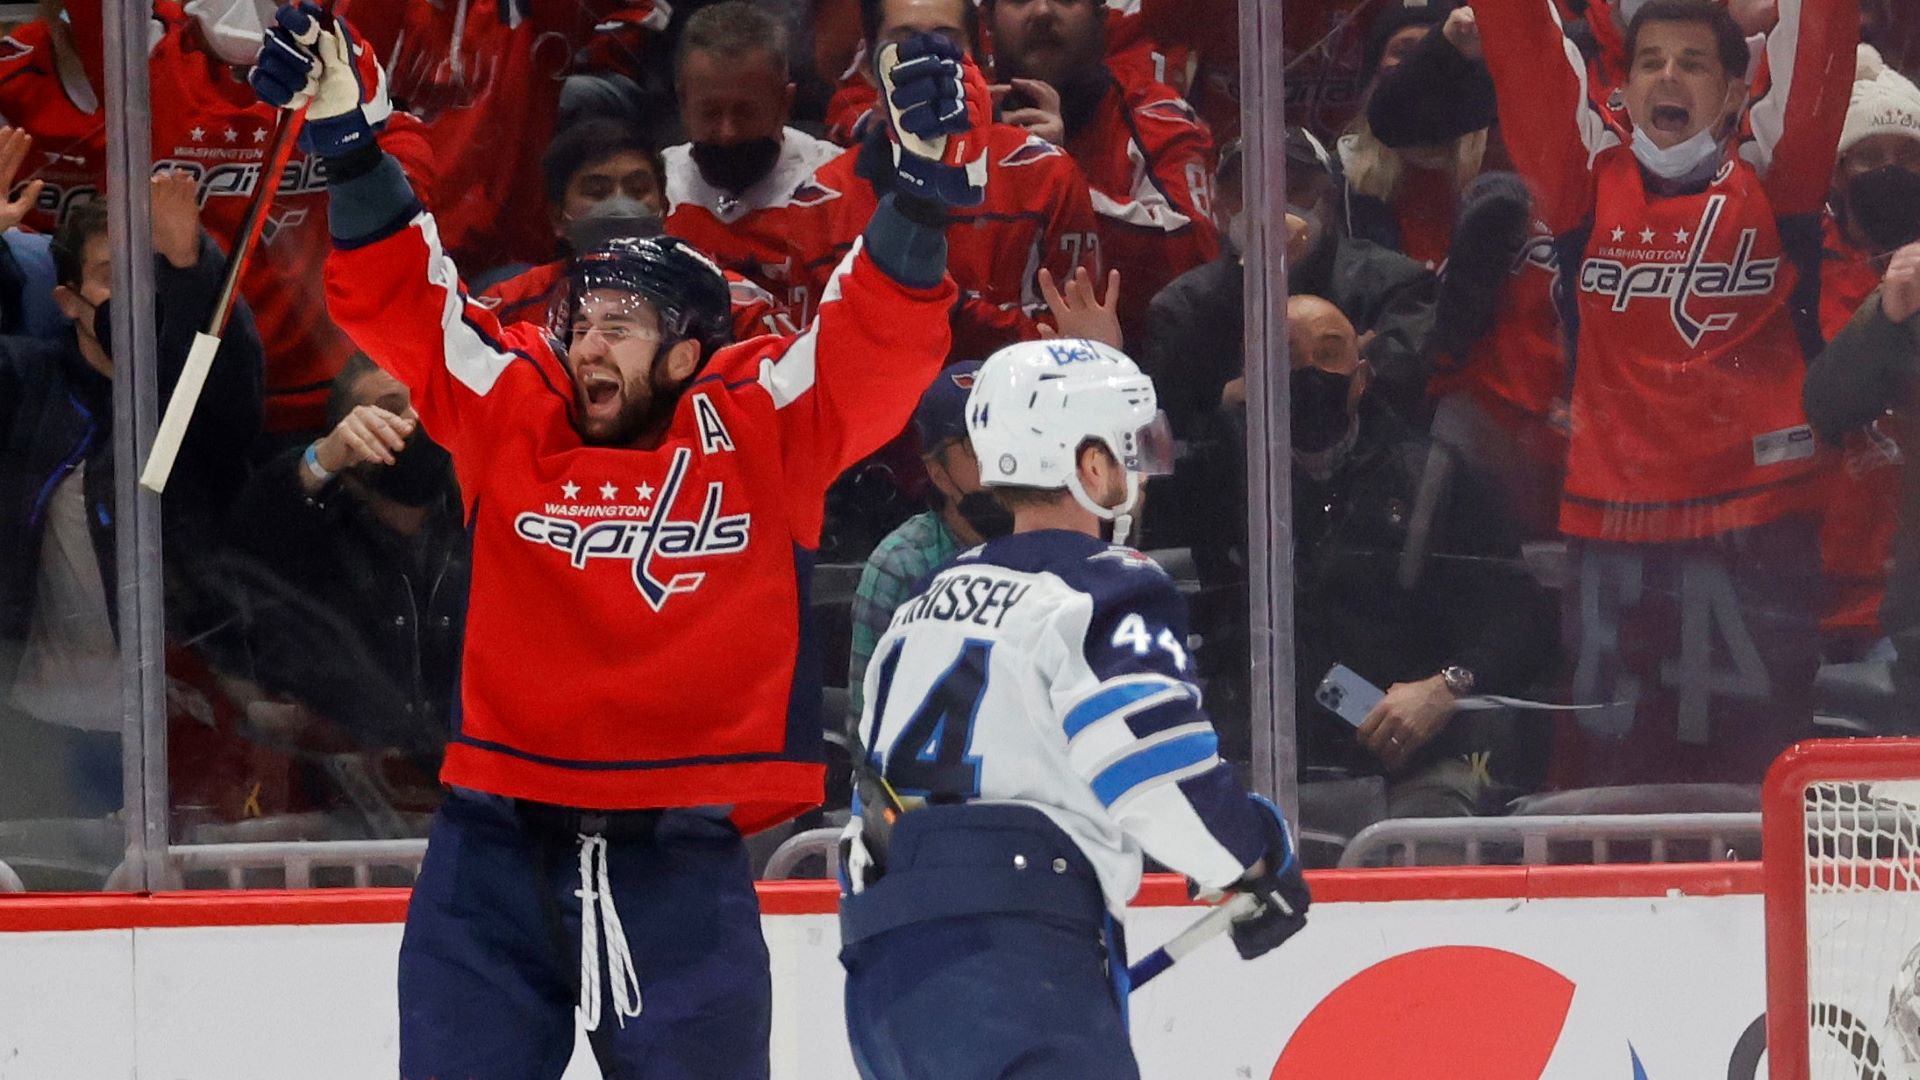 Capitals Finally Overtime Overtime Hurdle for First Win in 12 Tries